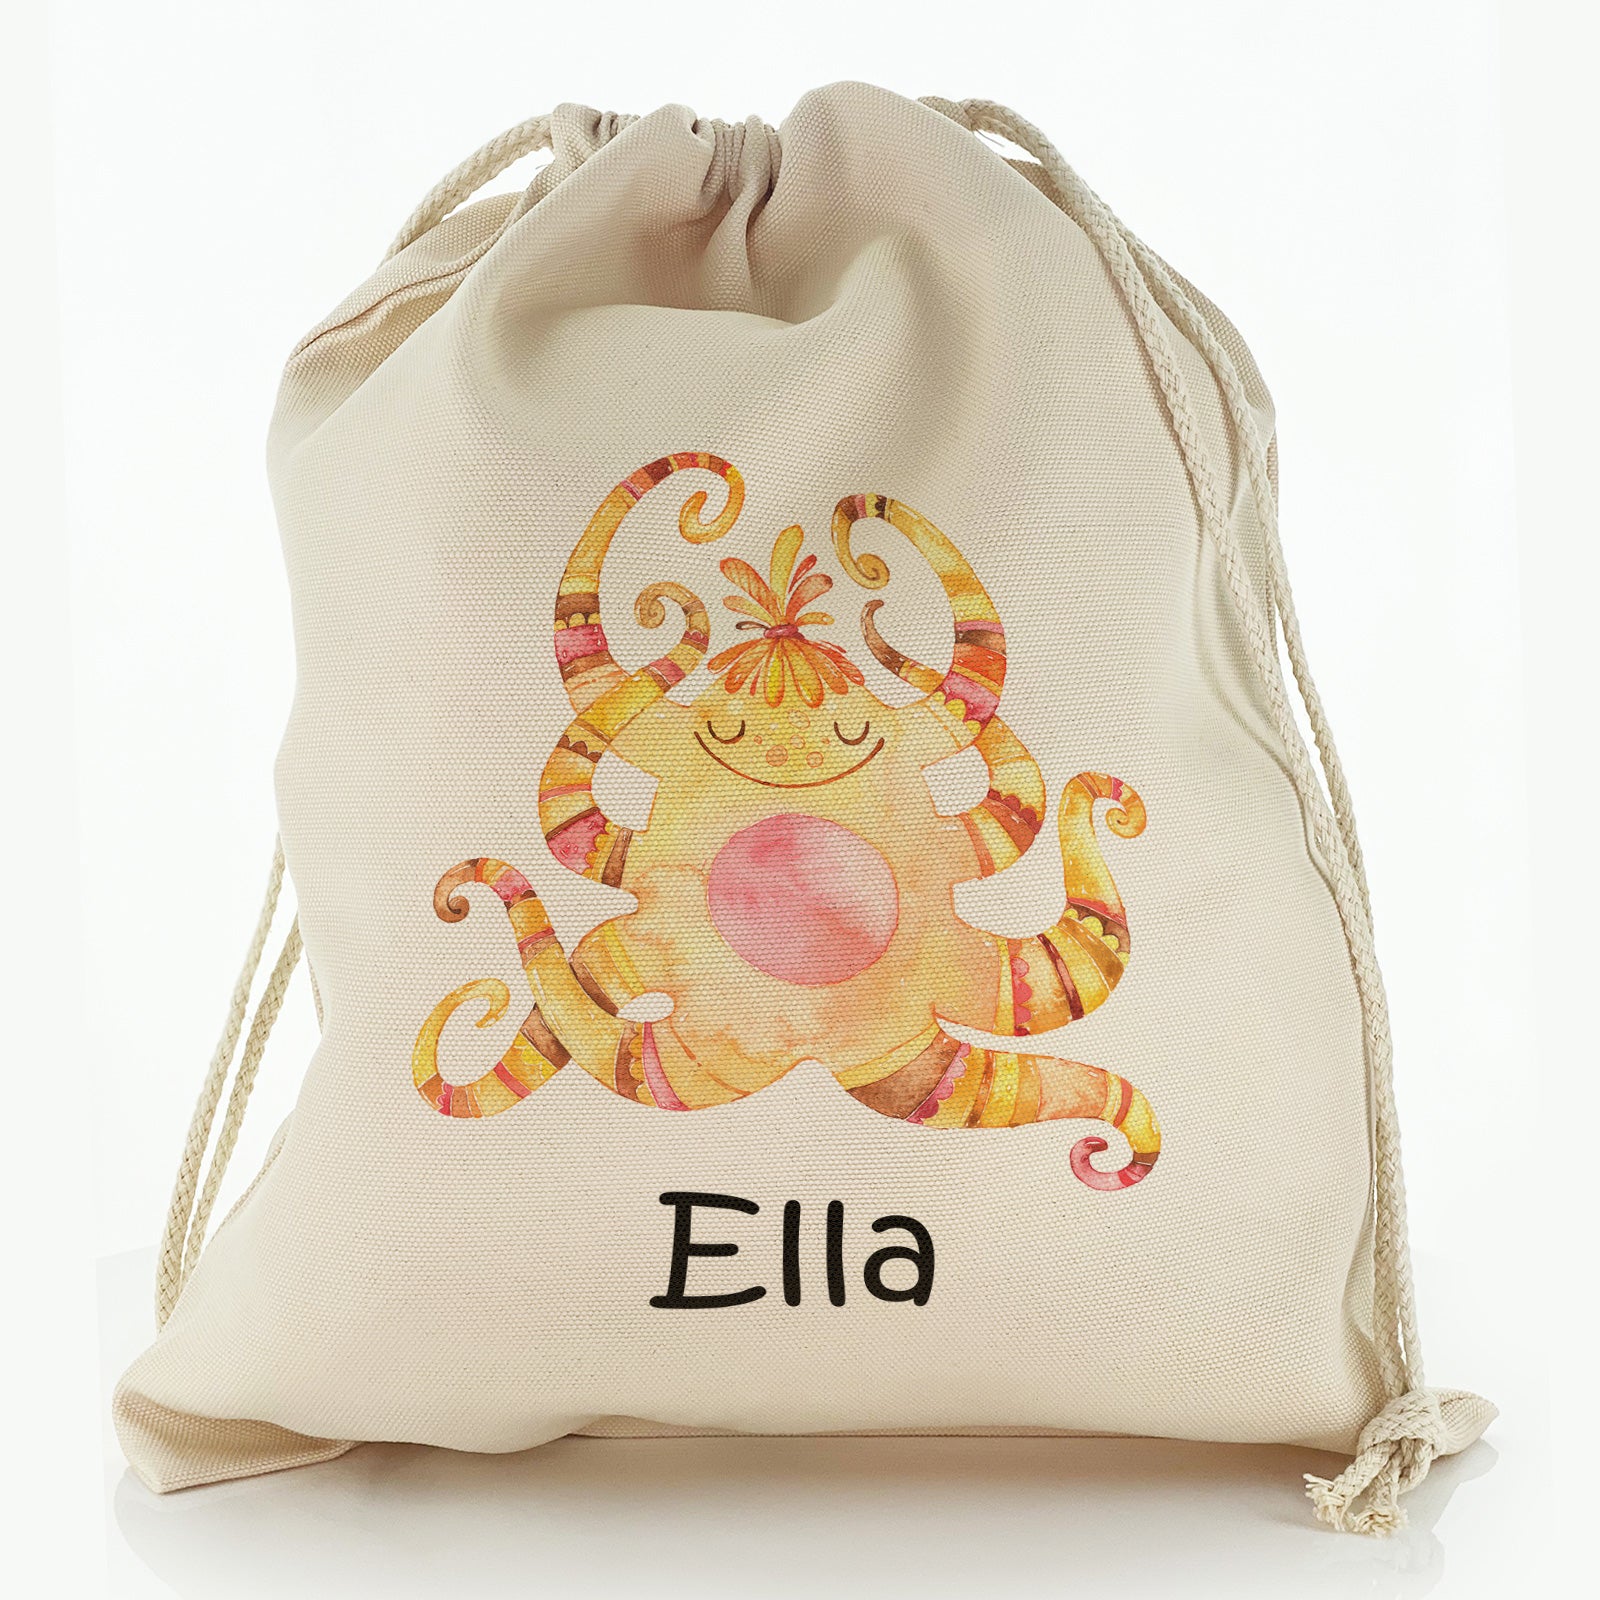 Personalised Canvas Sack with Childish Text and Tentacled Yellow Monster